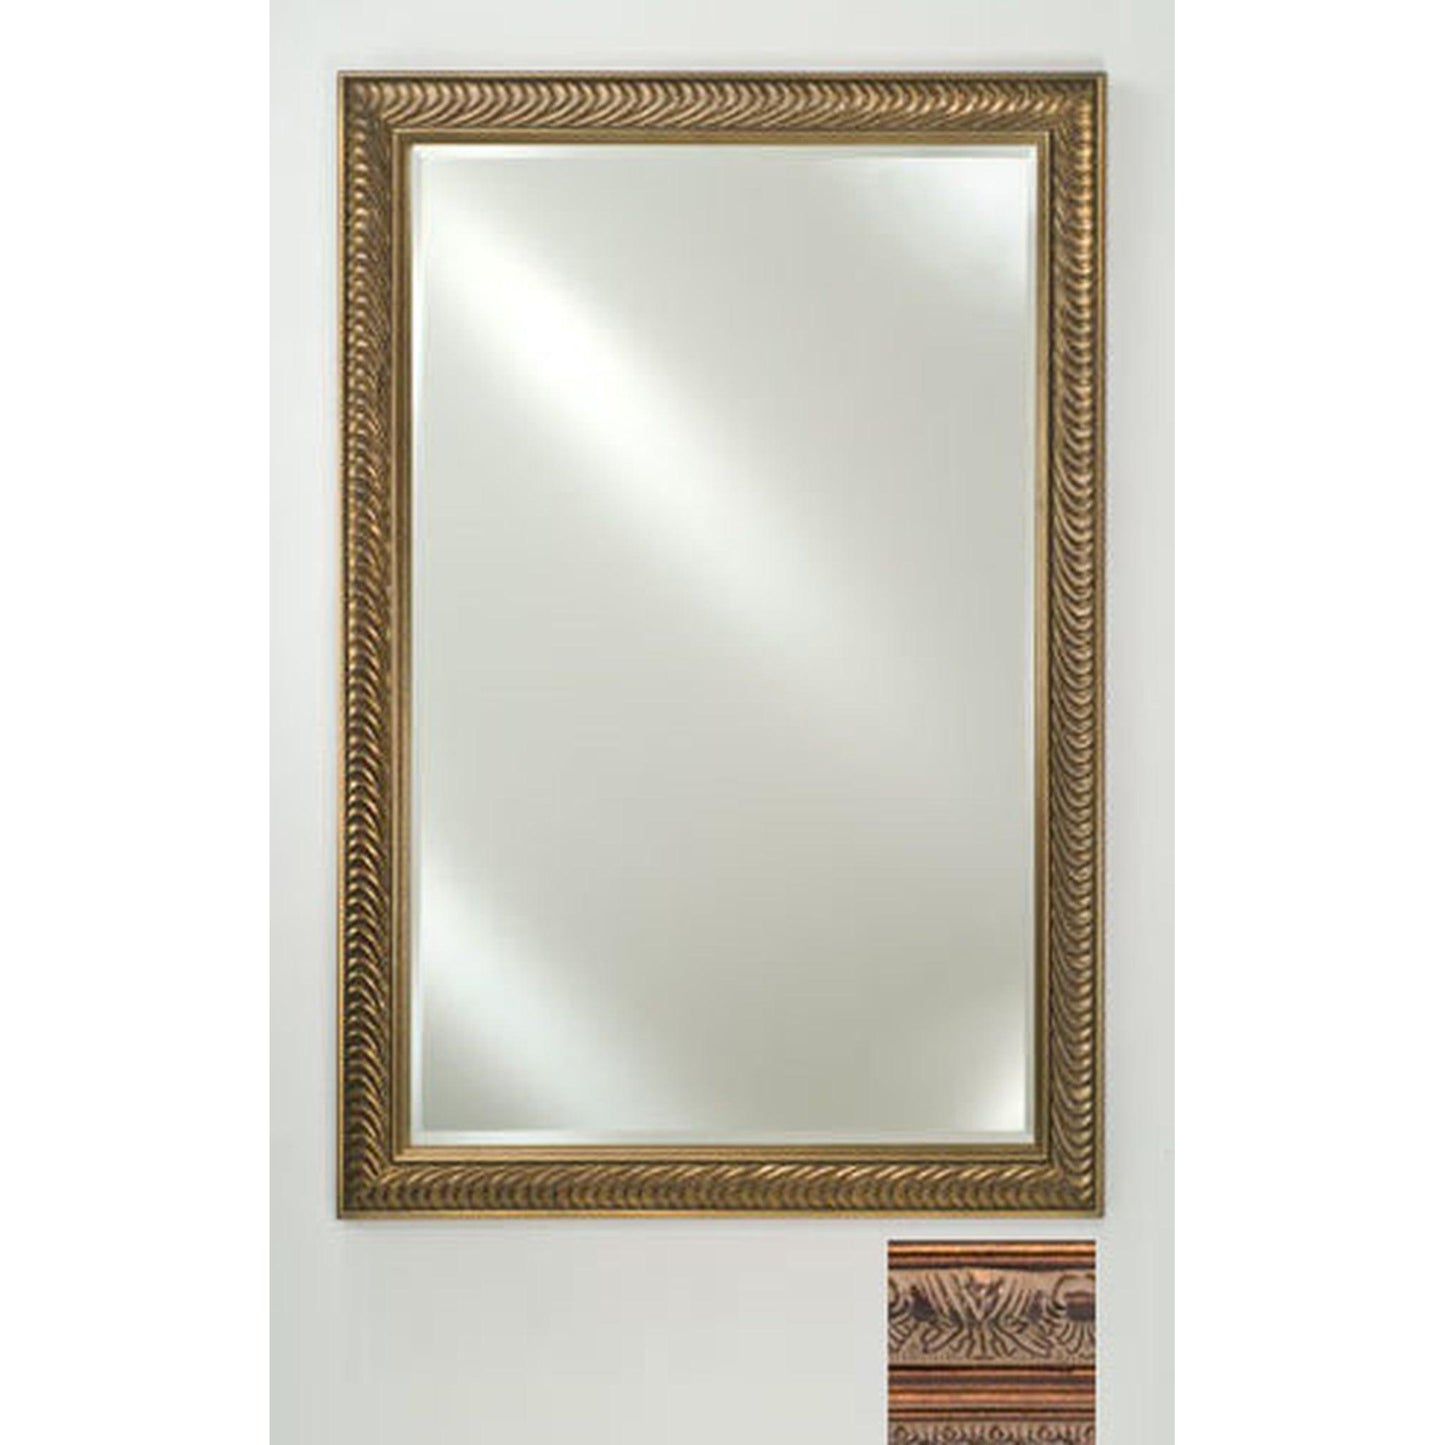 Afina Signature 20" x 26" Siena Oiled Bronze Framed Mirror With Beveled Edge